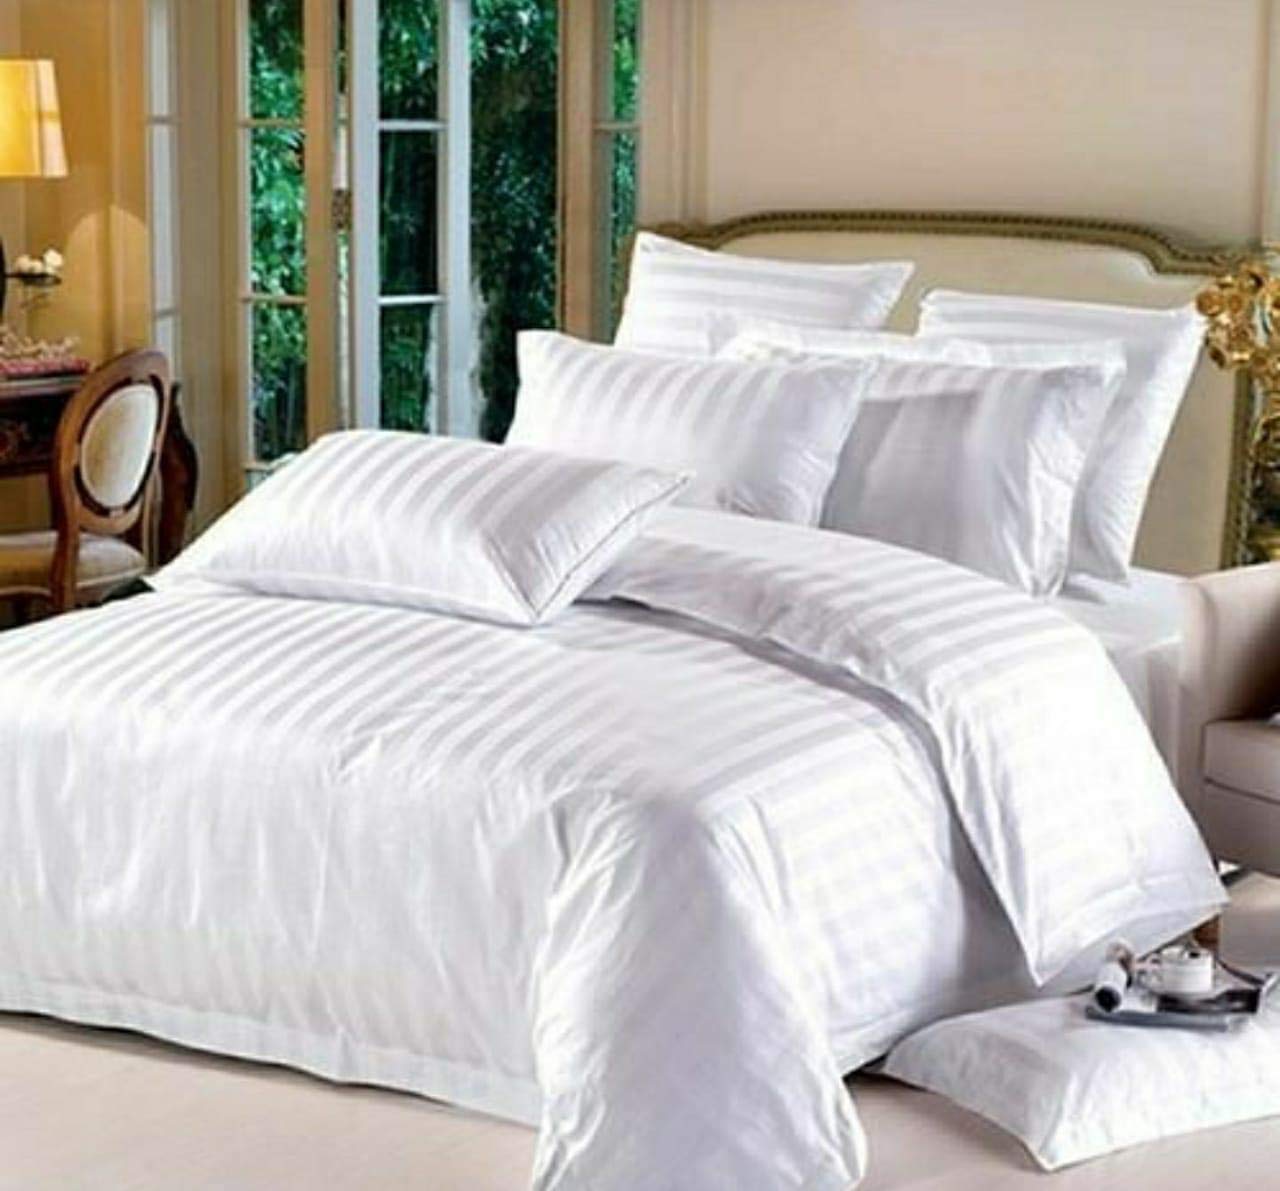 TC Glace Cotton Satin Stripes Plain Bedsheet King Size Double Bed With Two Pillow Covers For